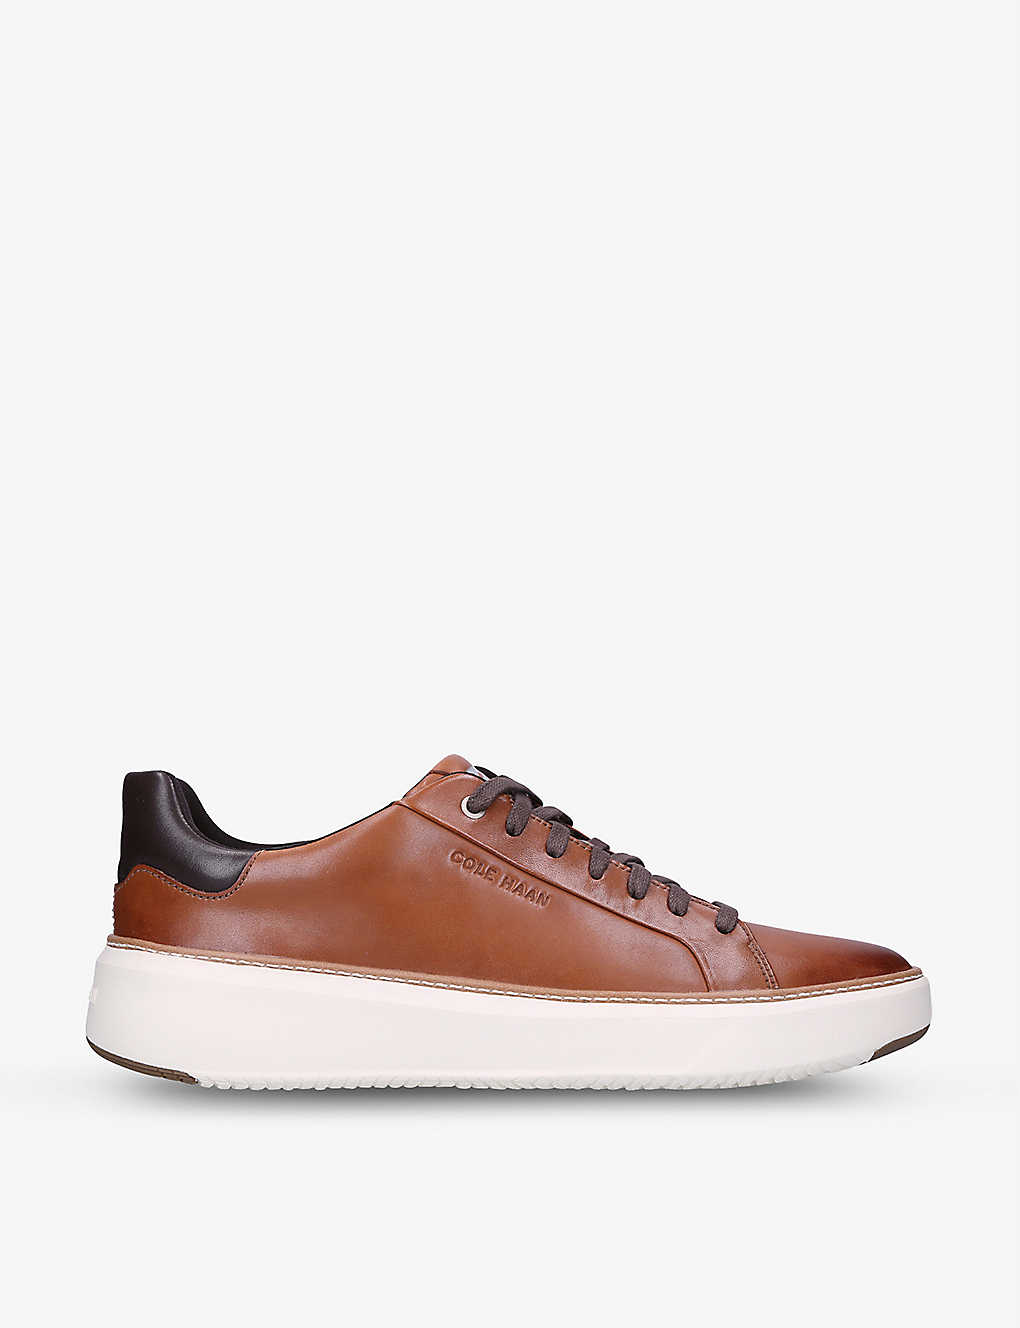 Shop Cole Haan Men's Tan Comb Grandprø Topspin Leather Trainers